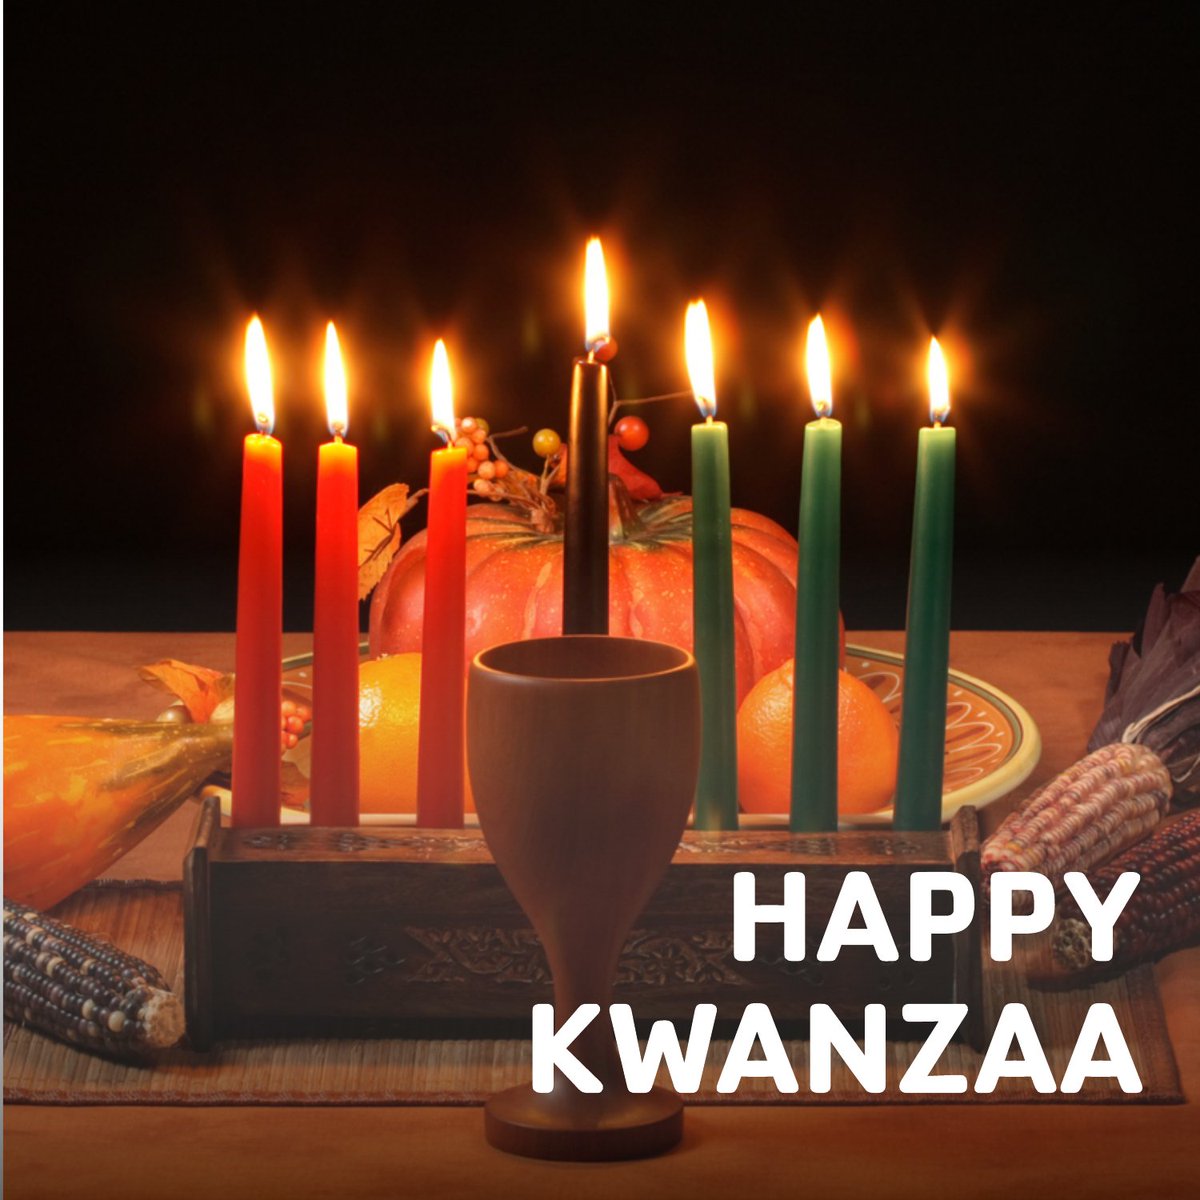 Happy Kwanzaa from the Y! Wishing you a joyful celebration filled with unity, creativity, and blessings. May this Kwanzaa bring inspiration, community, and a renewed spirit to all. #Kwanzaa #HappyKwanzaa #Holiday #Celebrate #FORALL